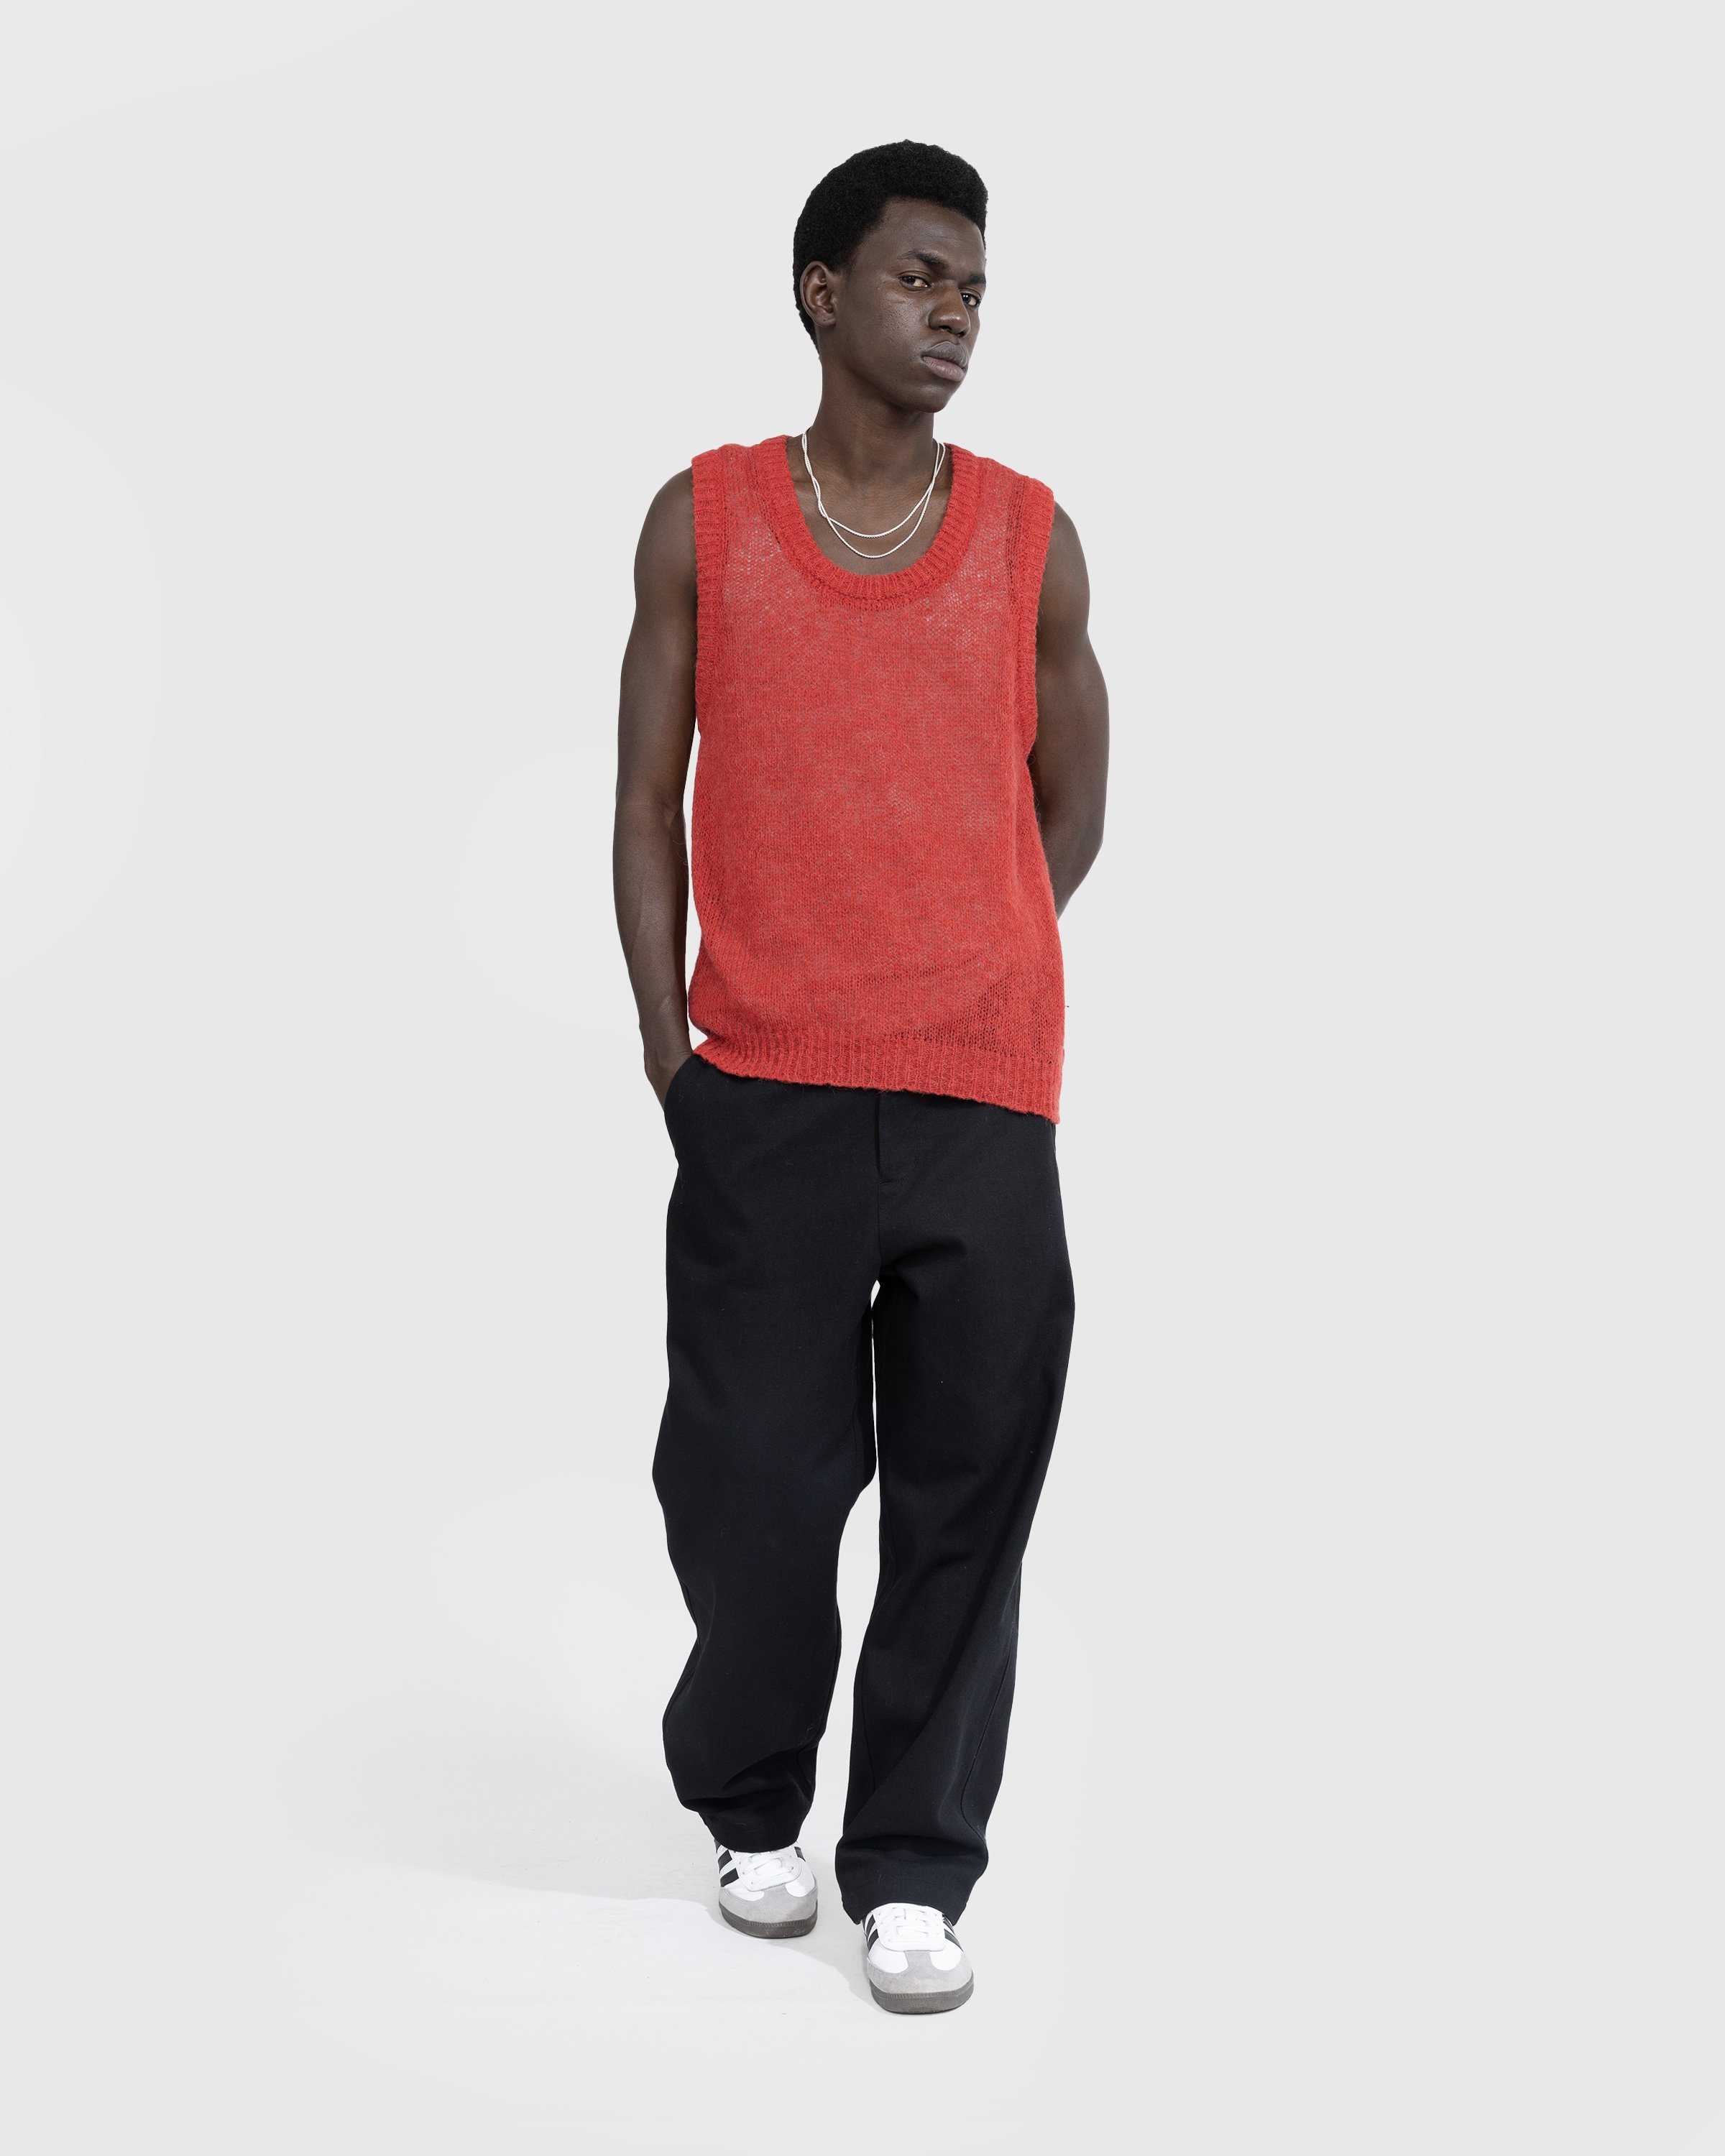 Highsnobiety HS05 - Loose Gage Tank Top Red - Clothing - Red - Image 6